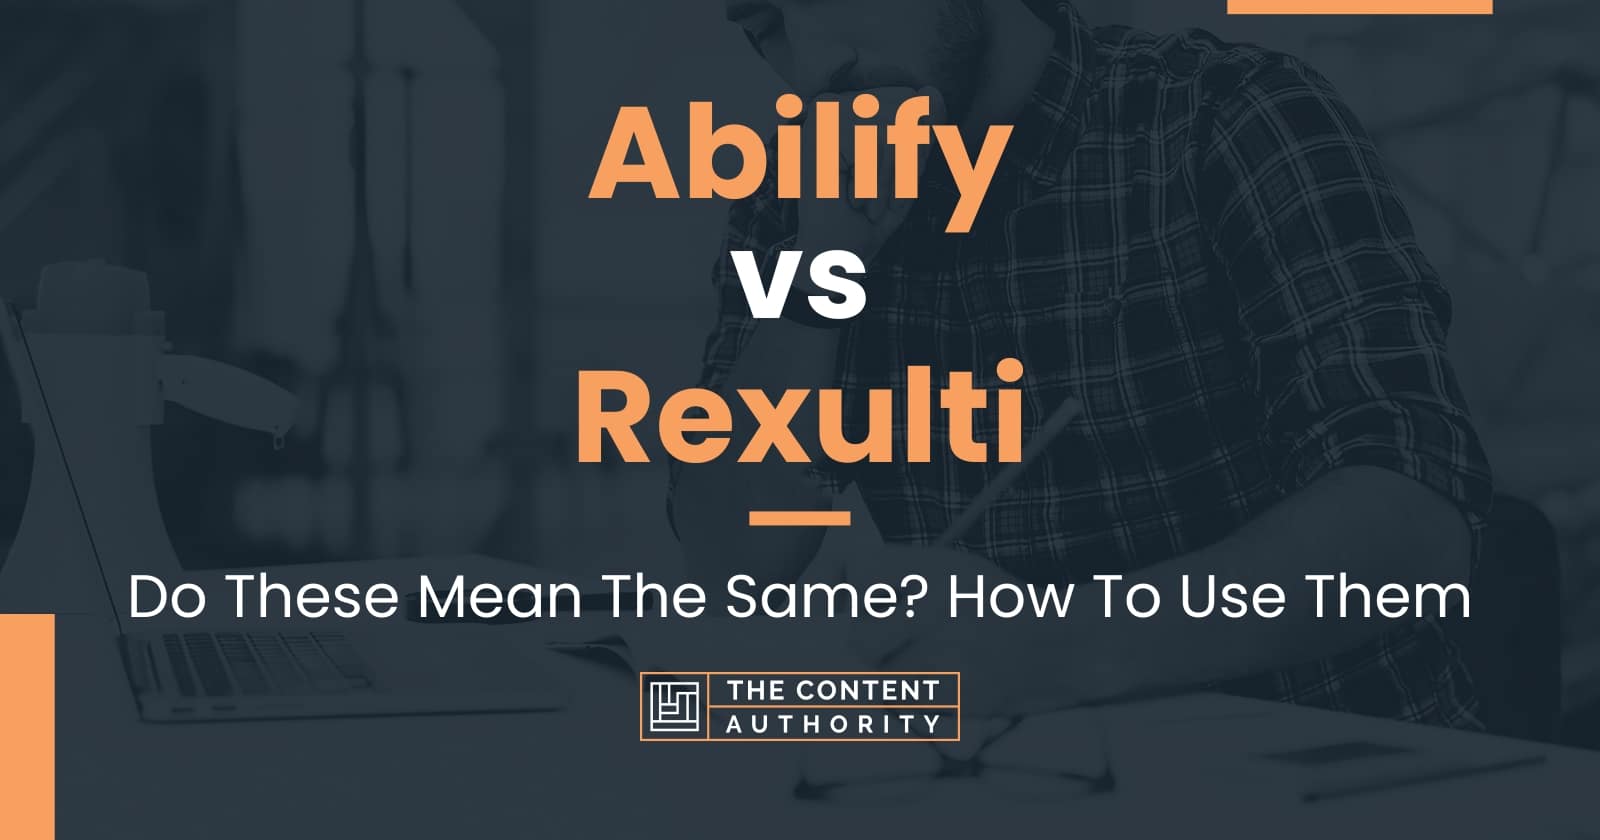 Rexulti vs Abilify: Which is best for you? 